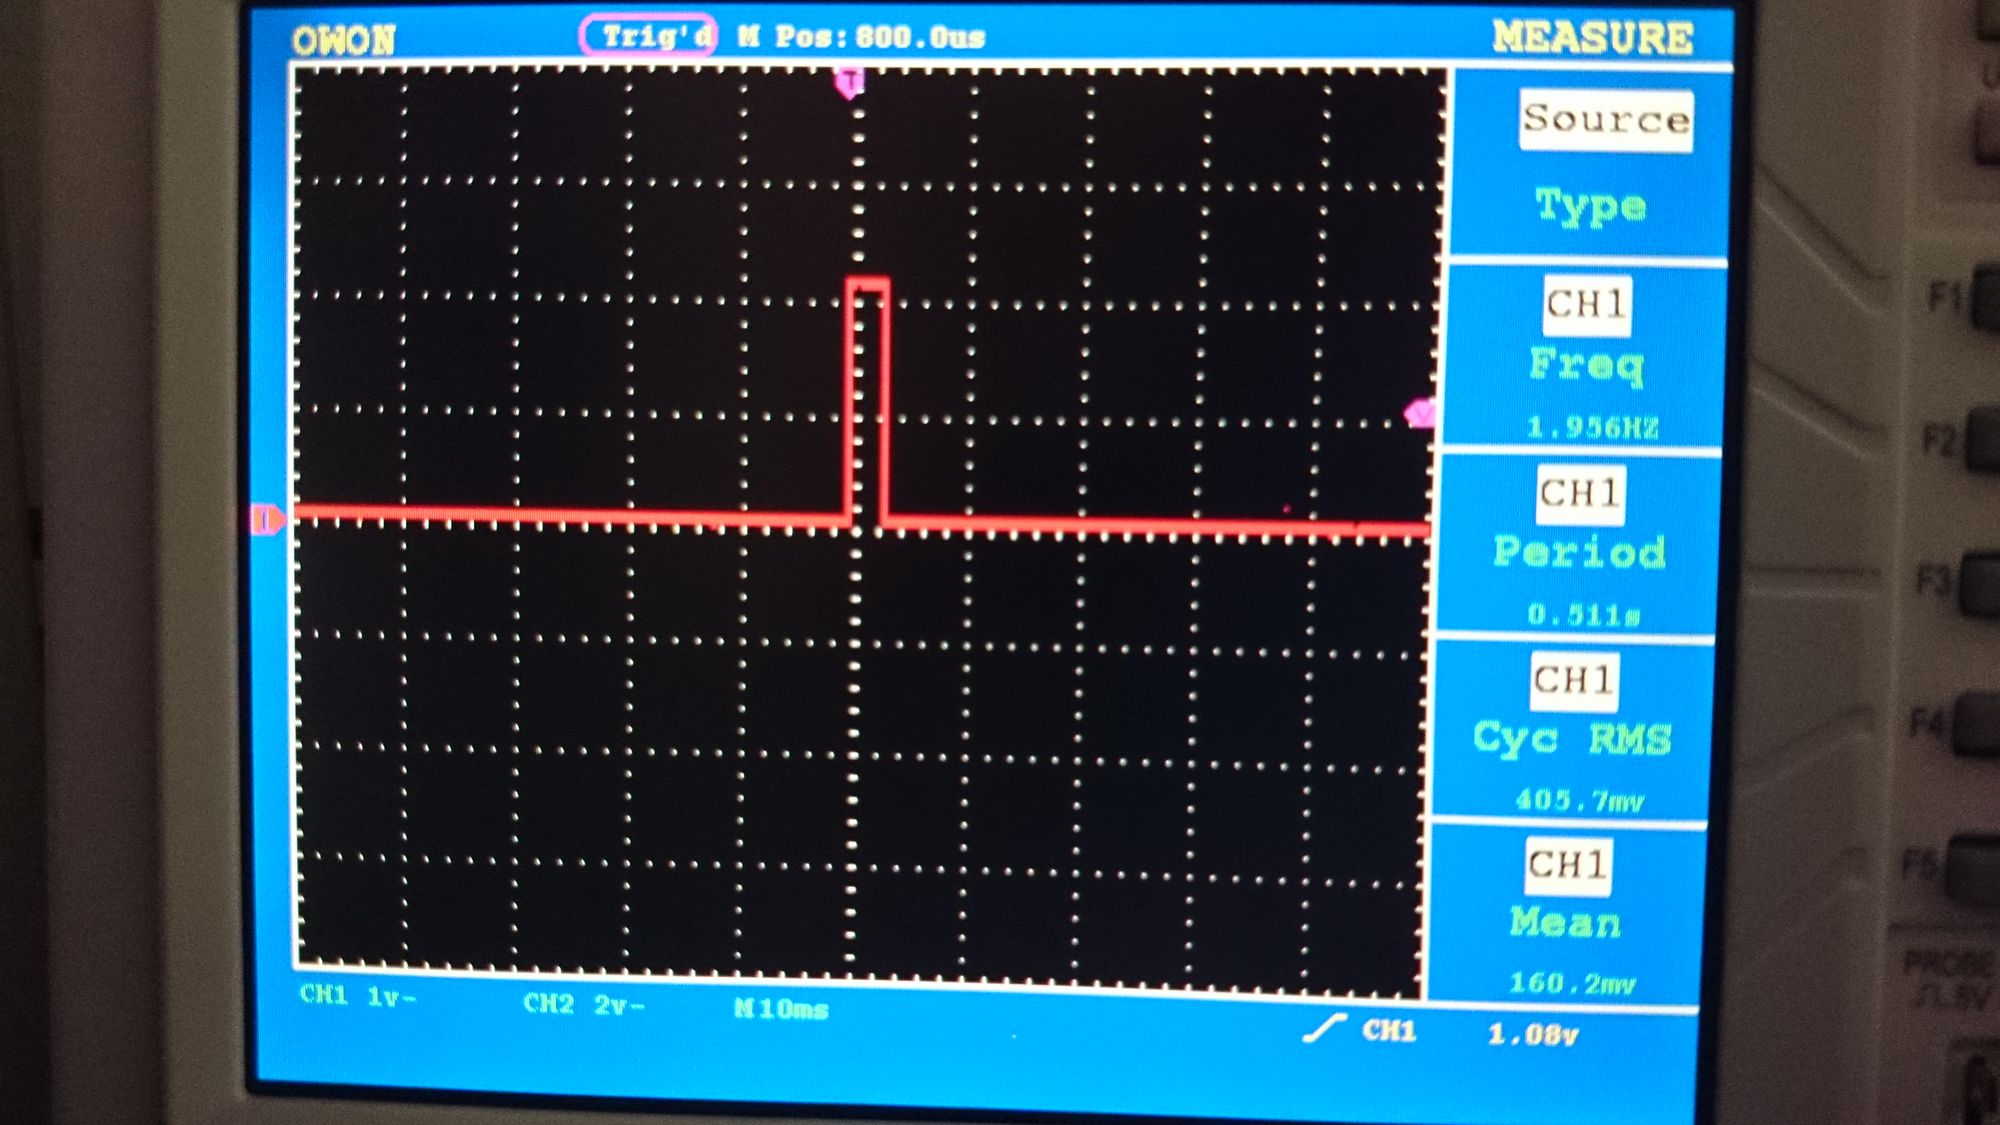 Here is what the blinking LED looks like on an oscilloscope.